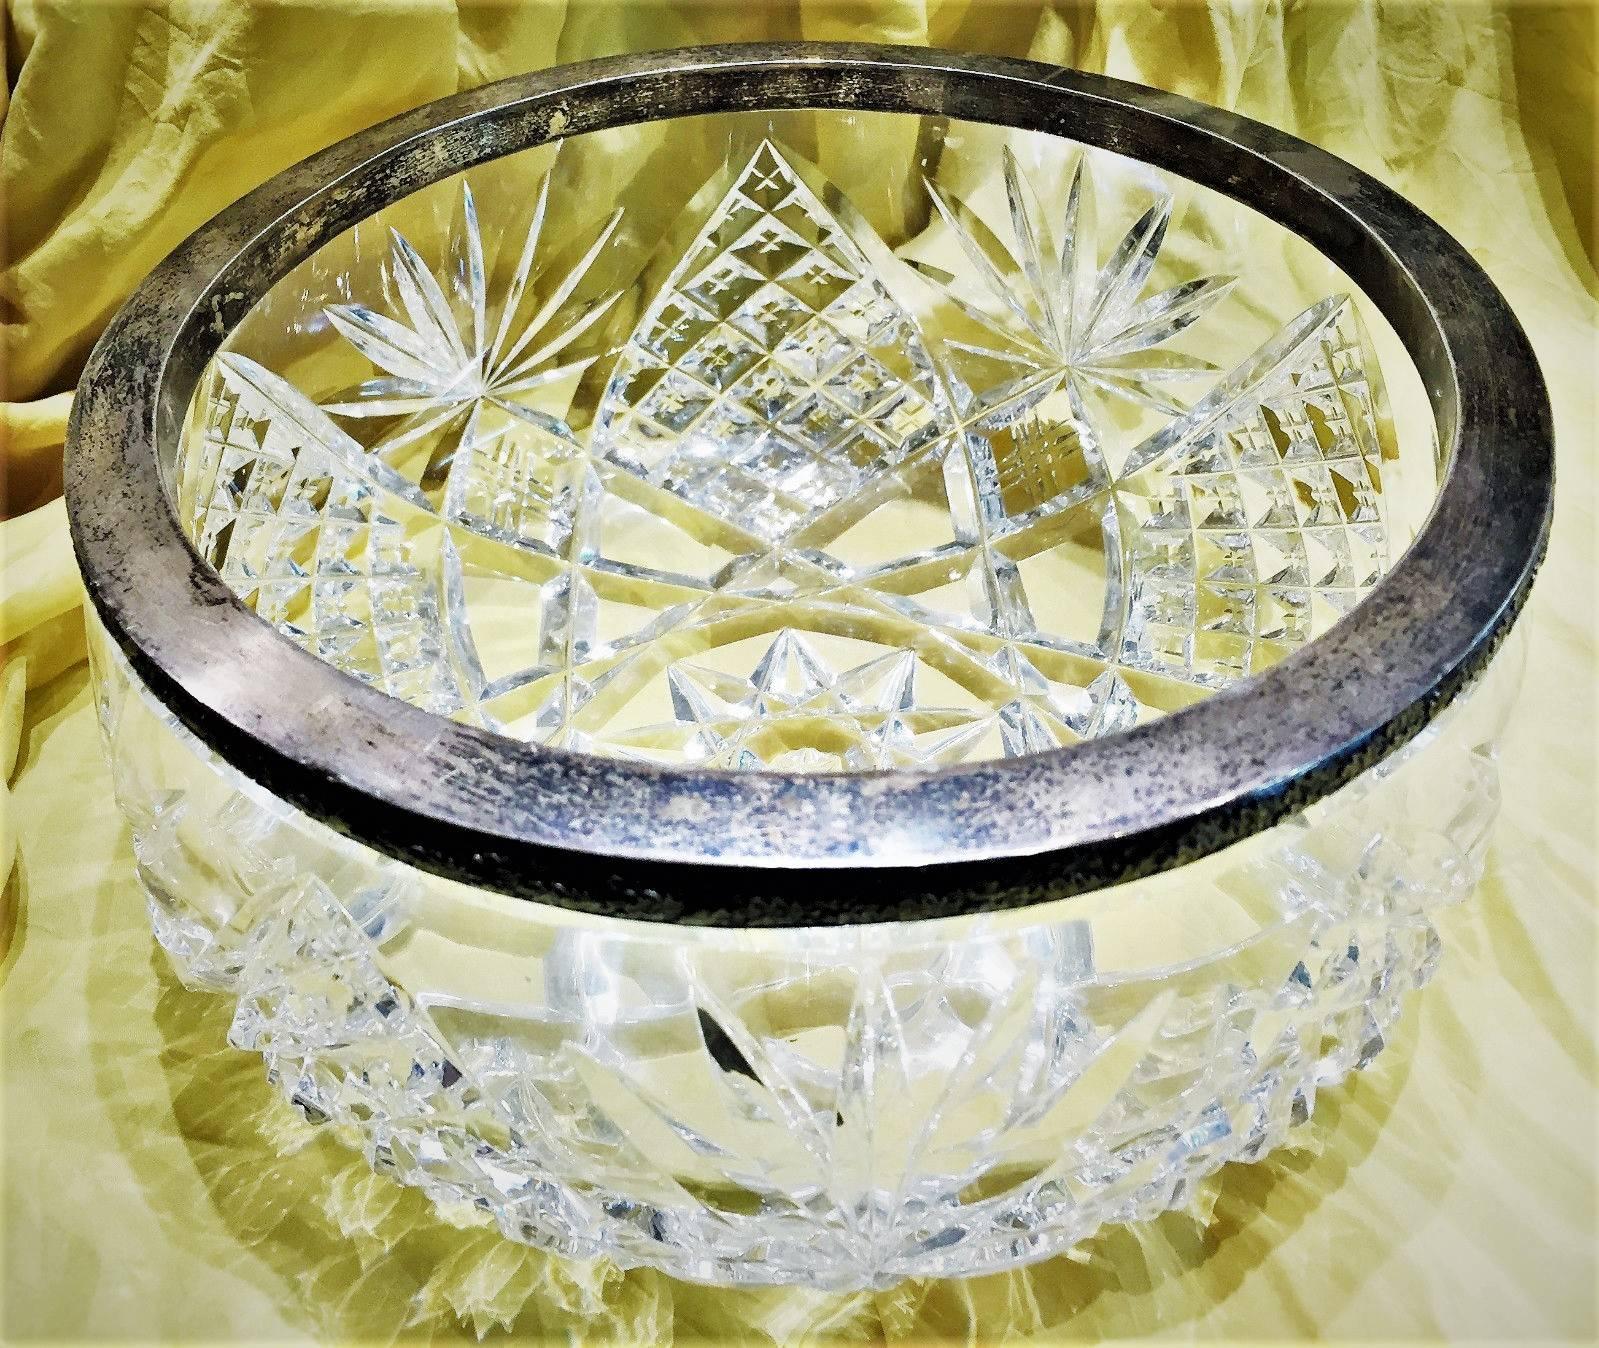 A Russian Classic, silver and hand-cut crystal circular serving bowl of unusually large dimensions, manufactured in Moscow, circa 1945. Silver rim features repeating oak leaf design, and is hallmarked with 